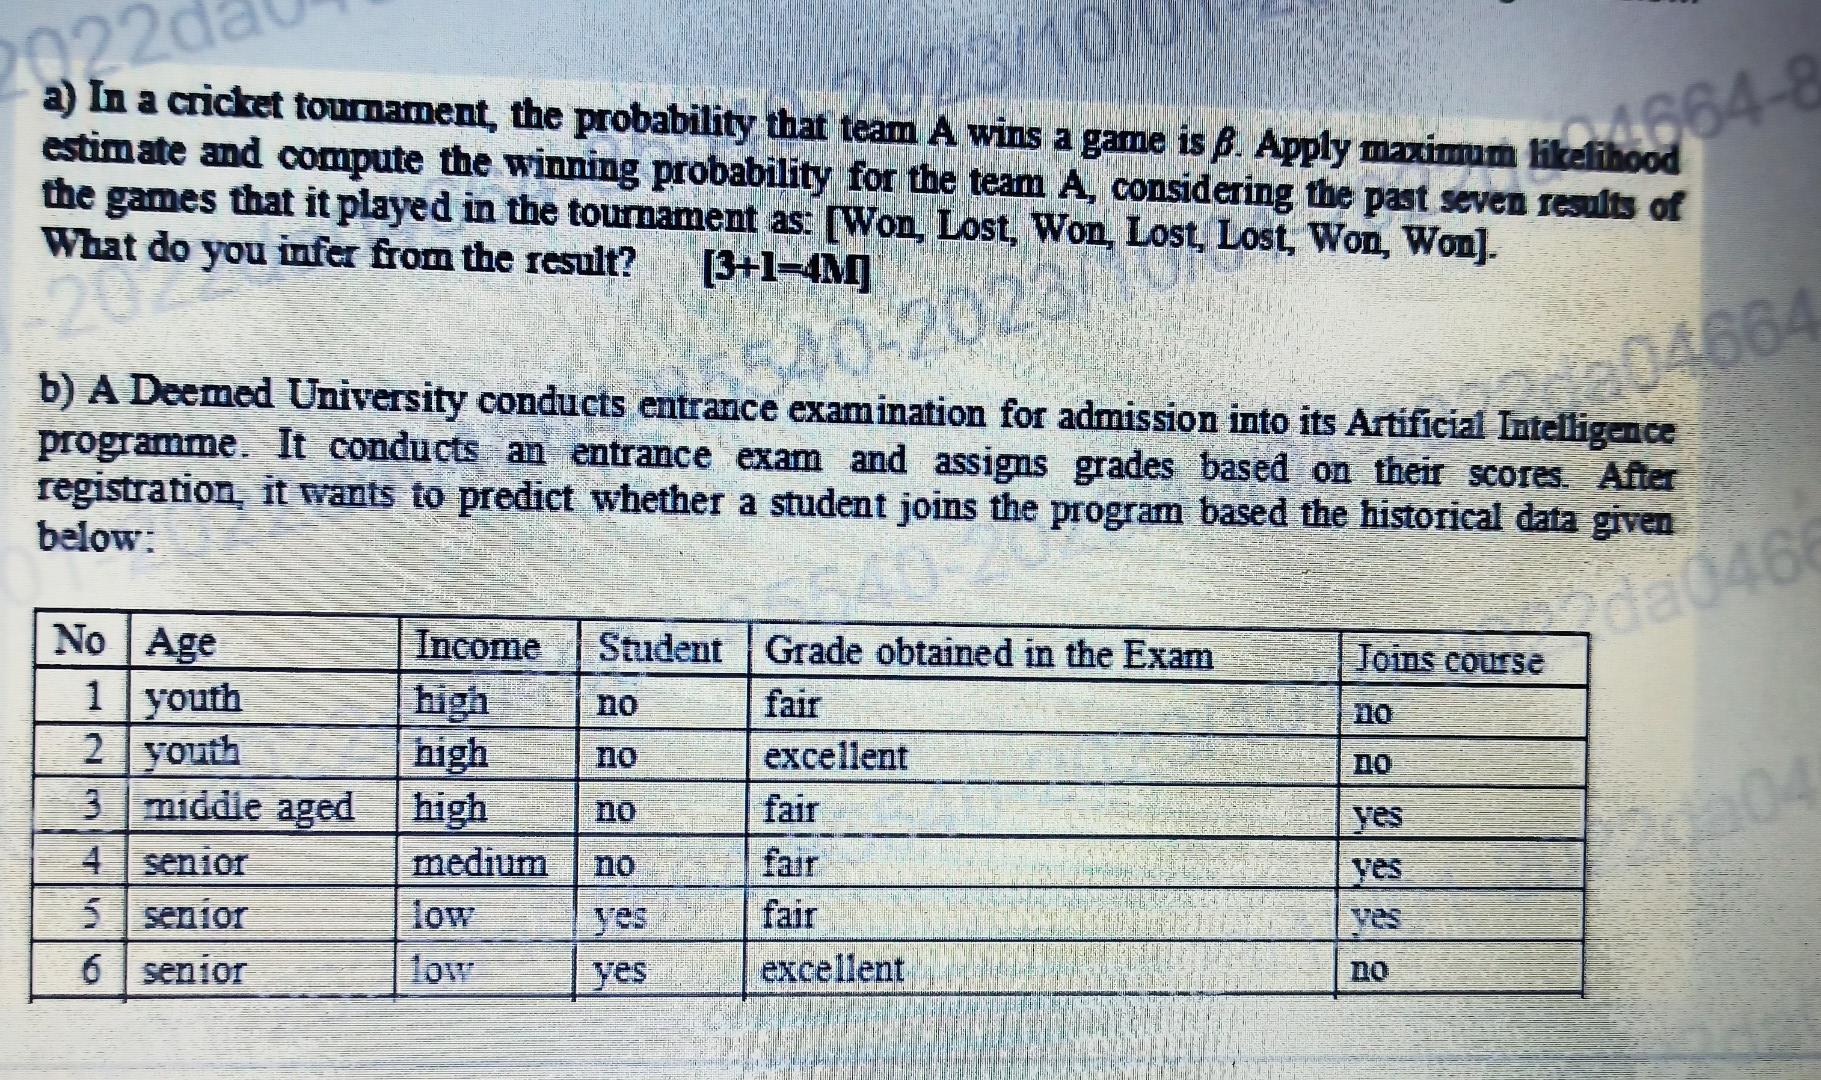 20220 a) In a cricket tournament, the probability that team A wins a game is B. Apply maximum likelihood